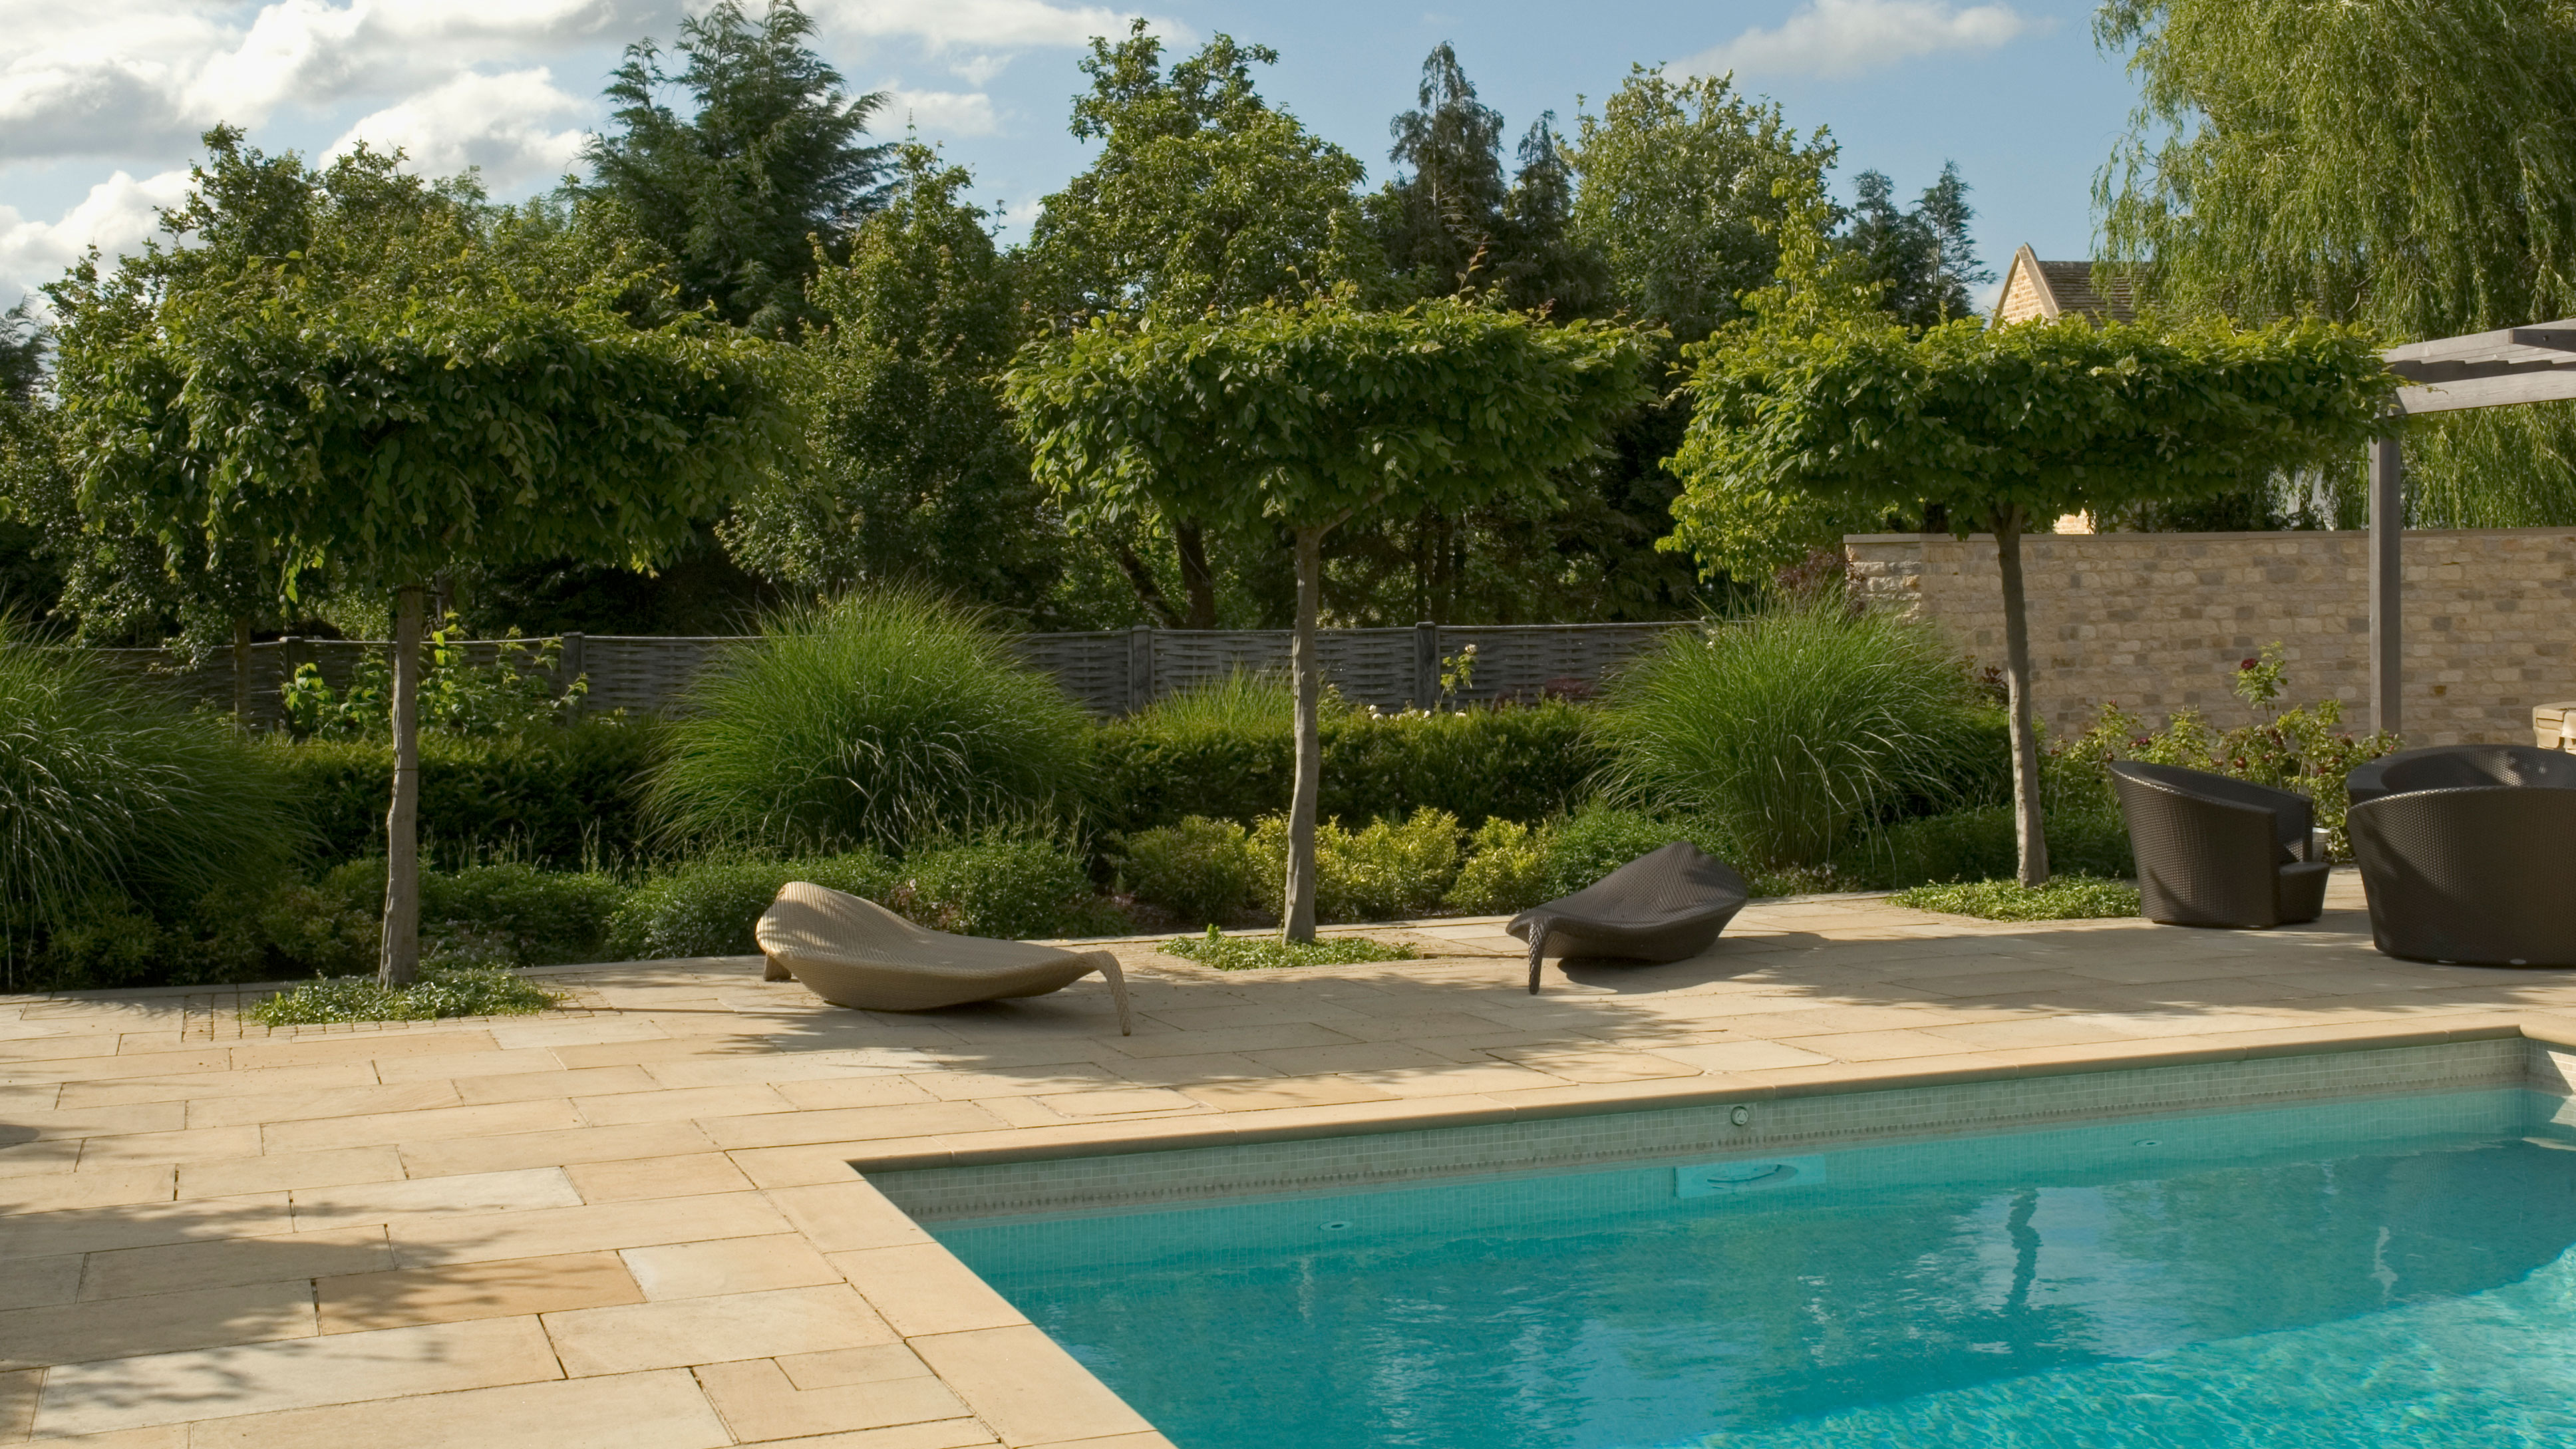 Pool Landscaping Ideas The Best, Landscaping Pool Areas